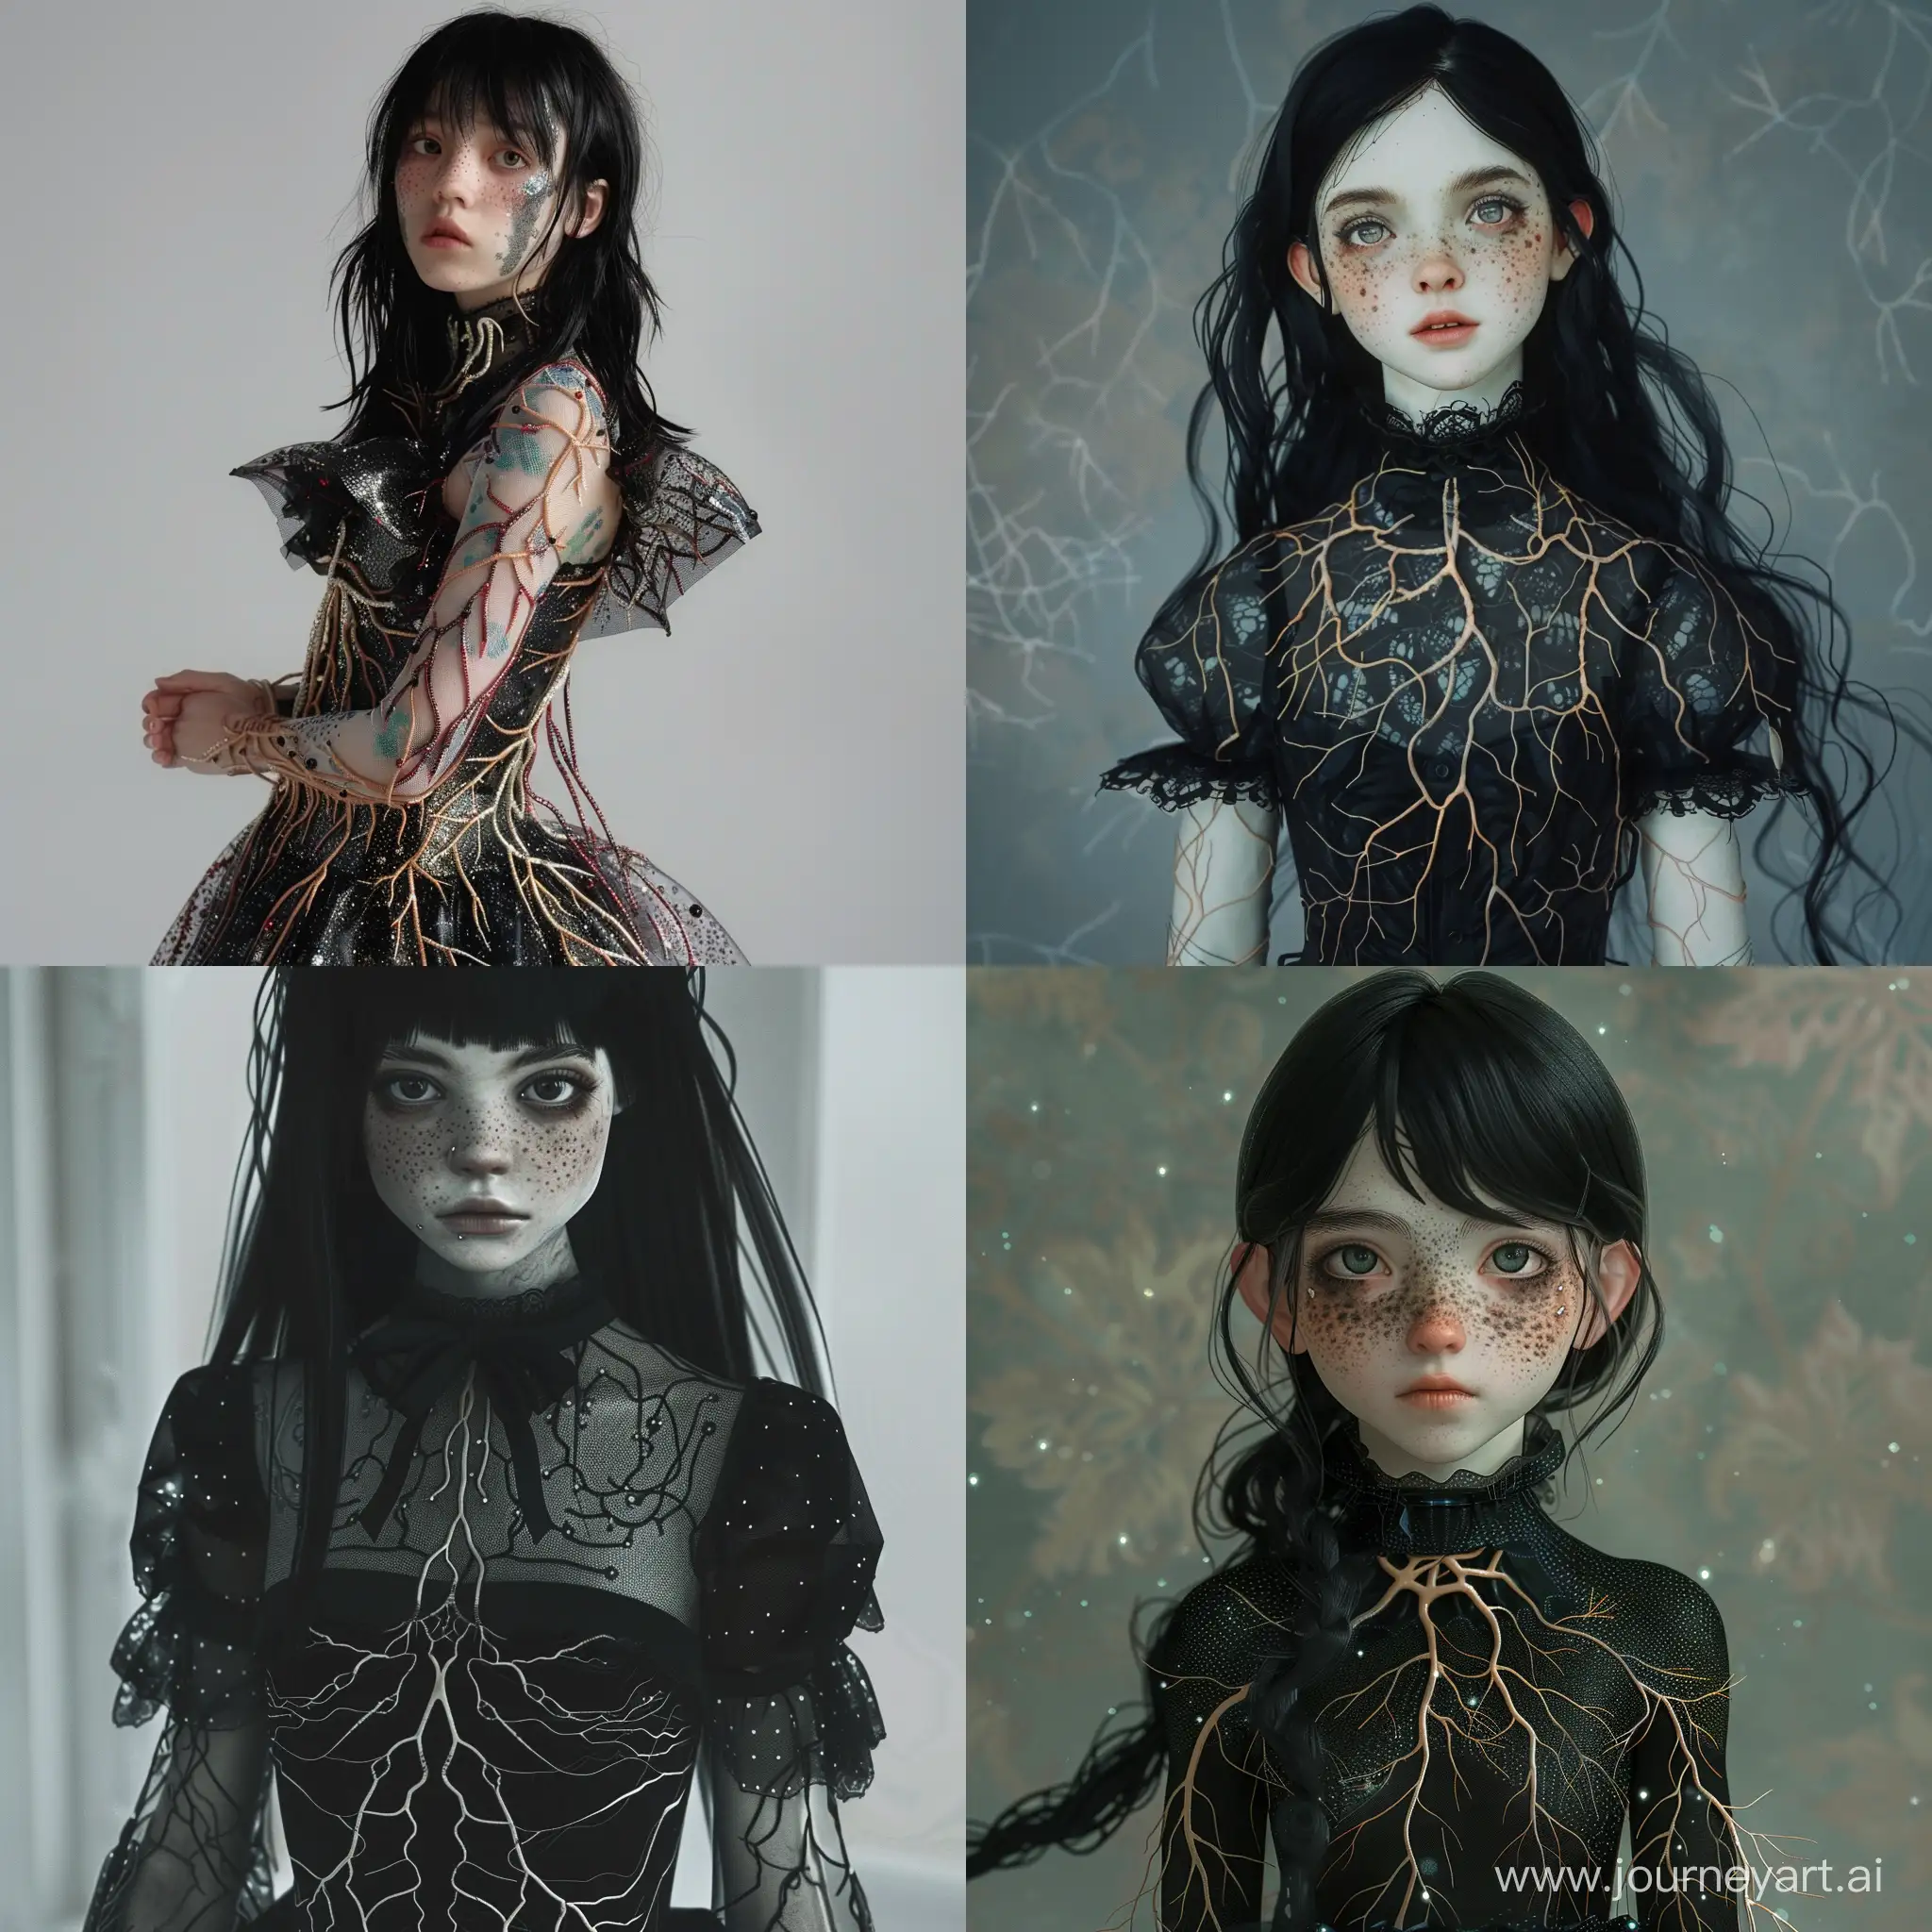 Futuristic-Gothic-BlackHaired-Girl-with-Freckles-in-Neural-Pattern-Dress